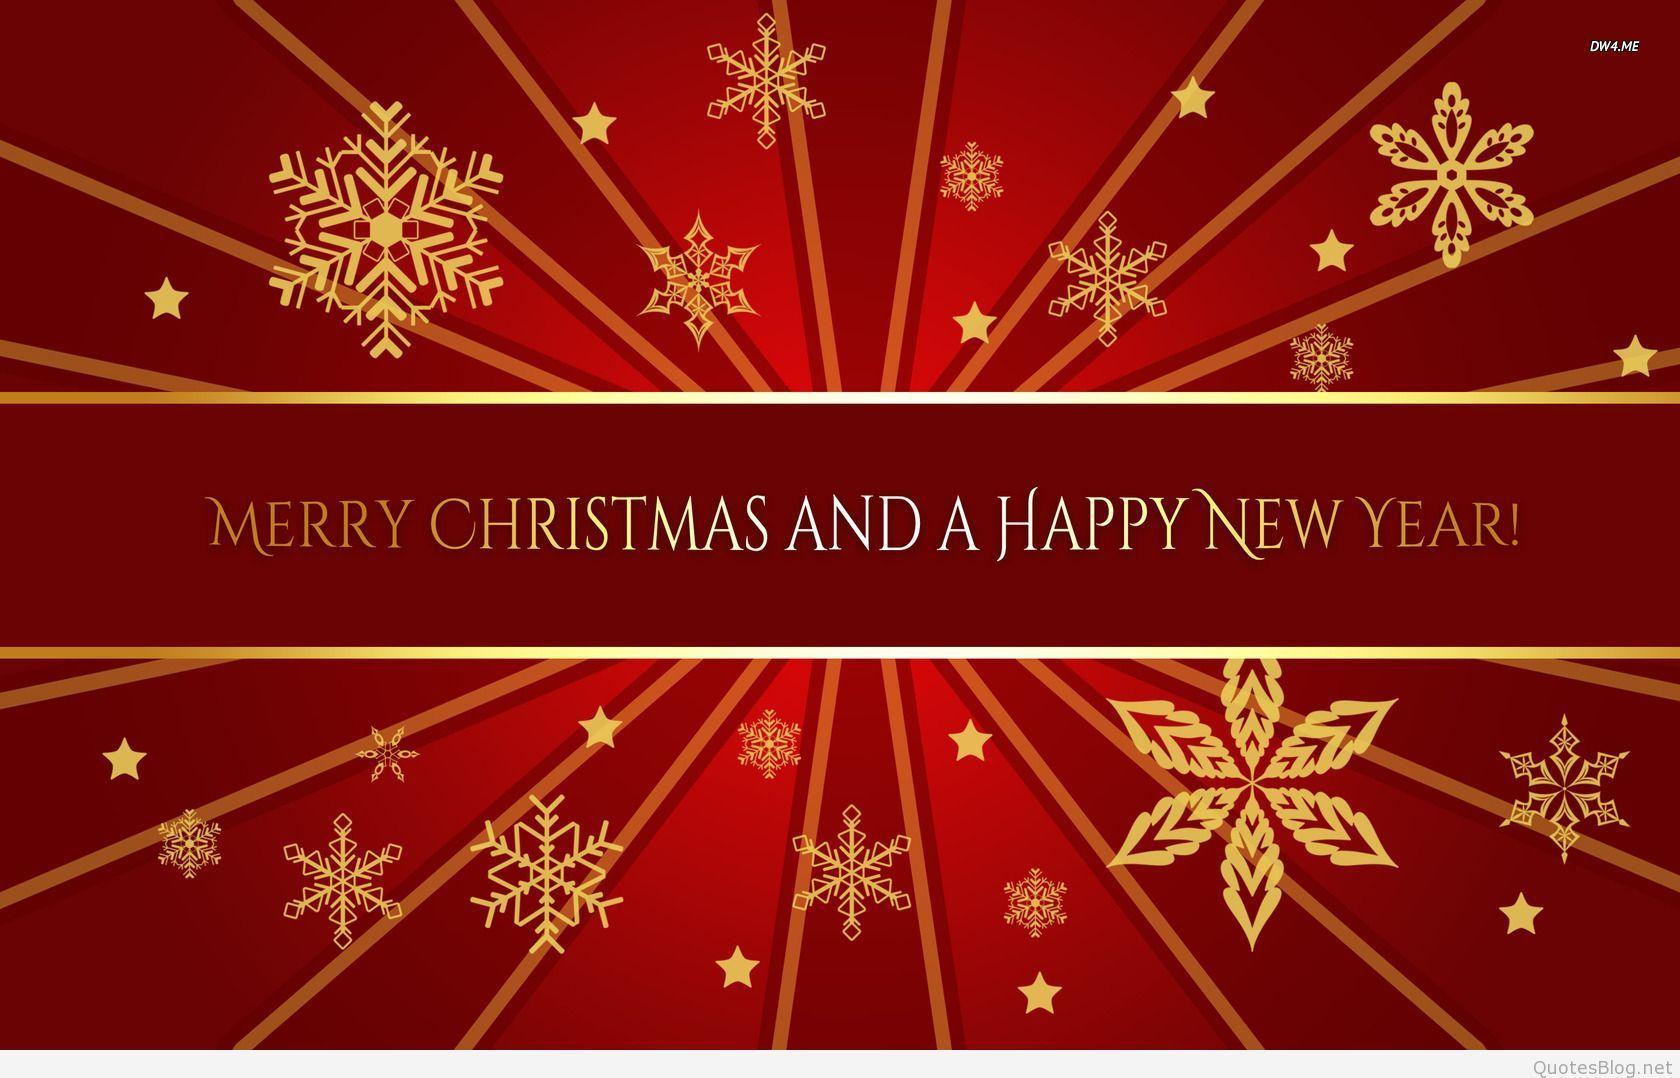 Best Merry Christmas & Happy new year quotes 2016